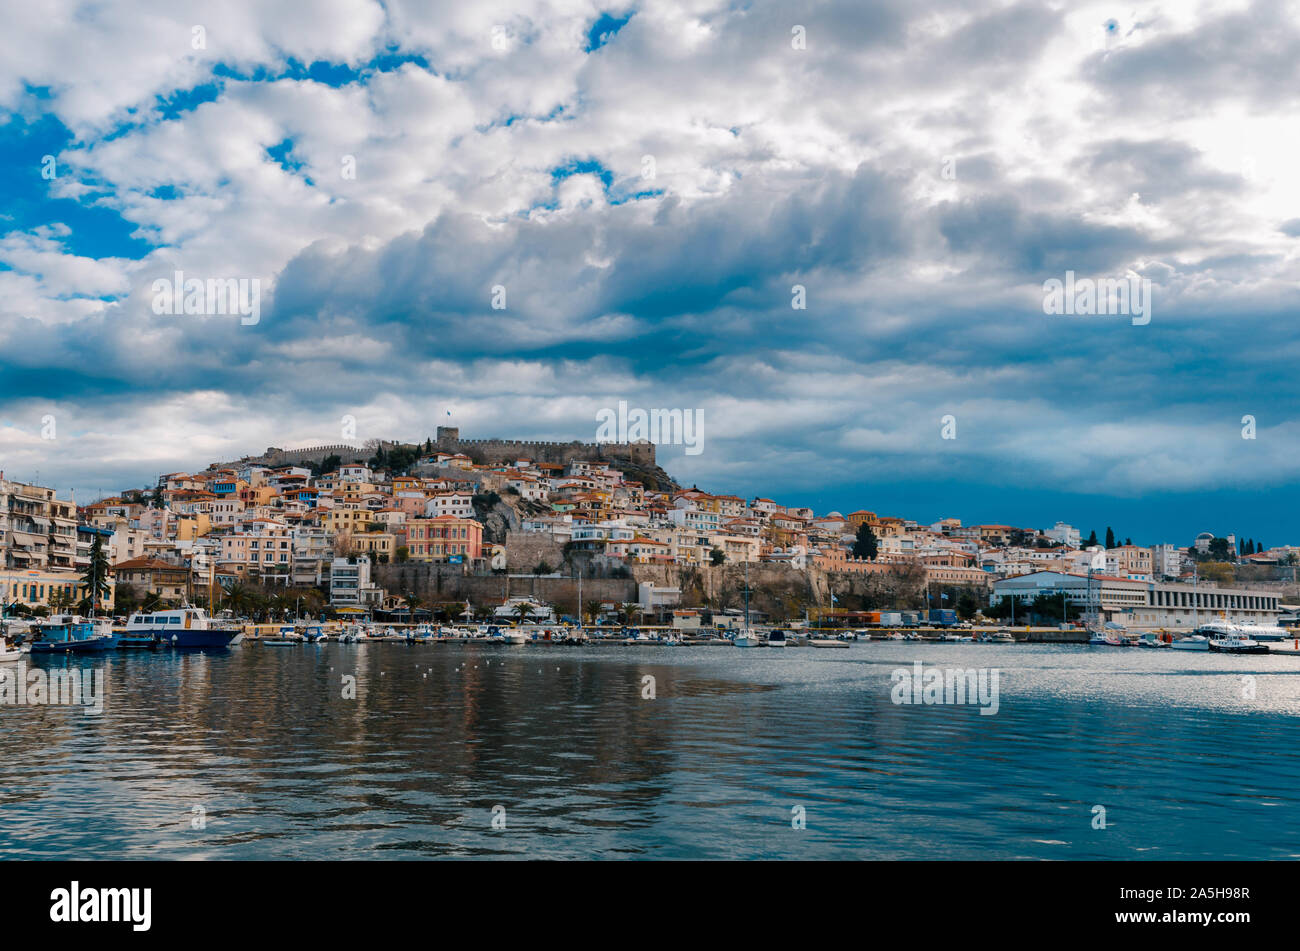 Amazing view of kavala, the picturesque city of north Greece, situated on the bay of Kavala,looking at the aegean sea. Stock Photo